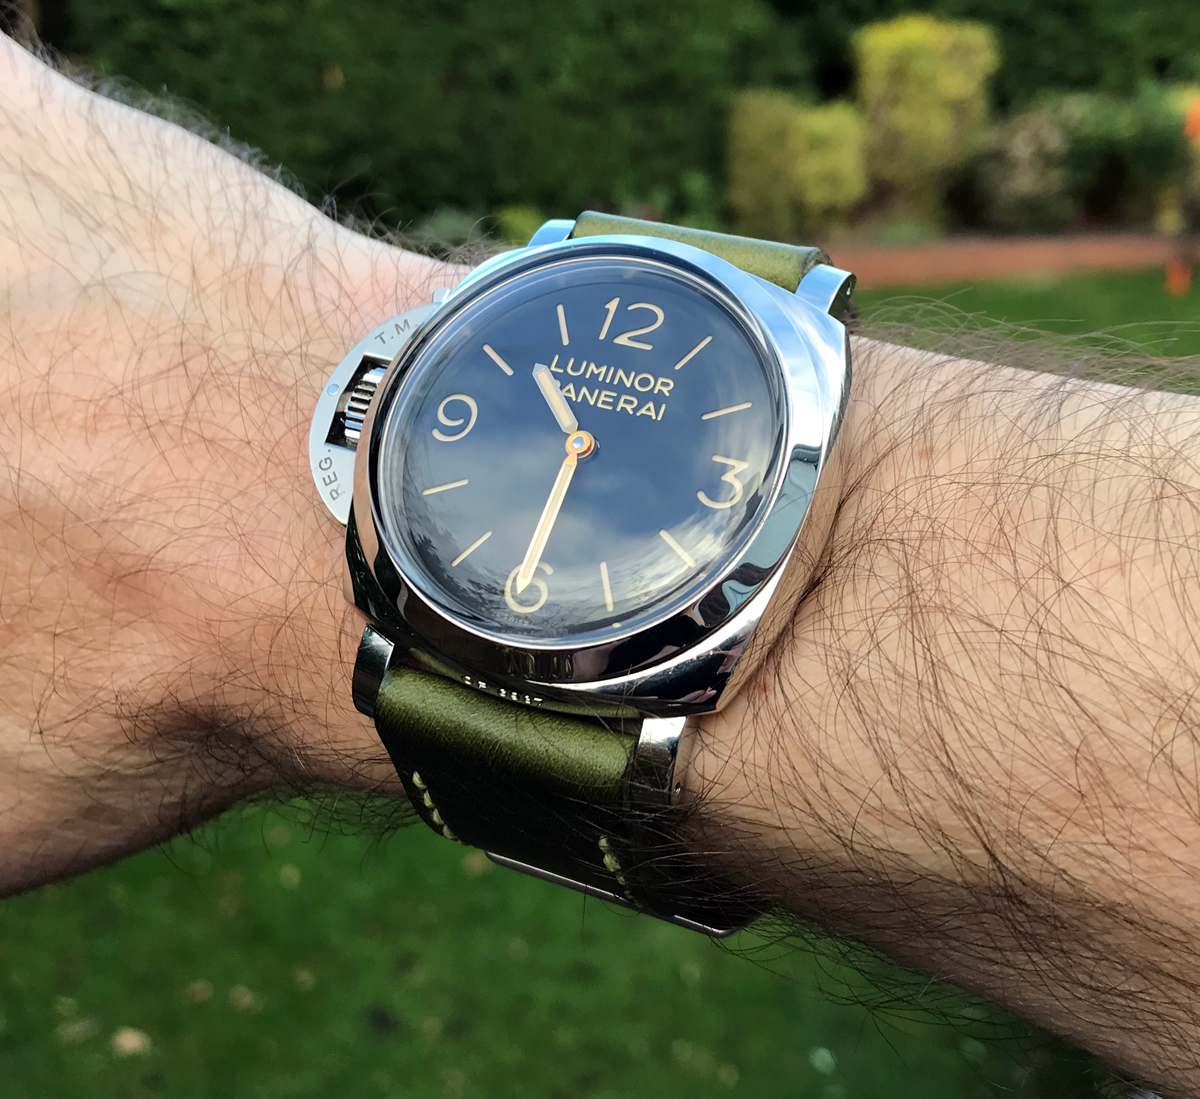 Panerai 557 on Antique Green leather with pale yellow stitching. © Terry Wright